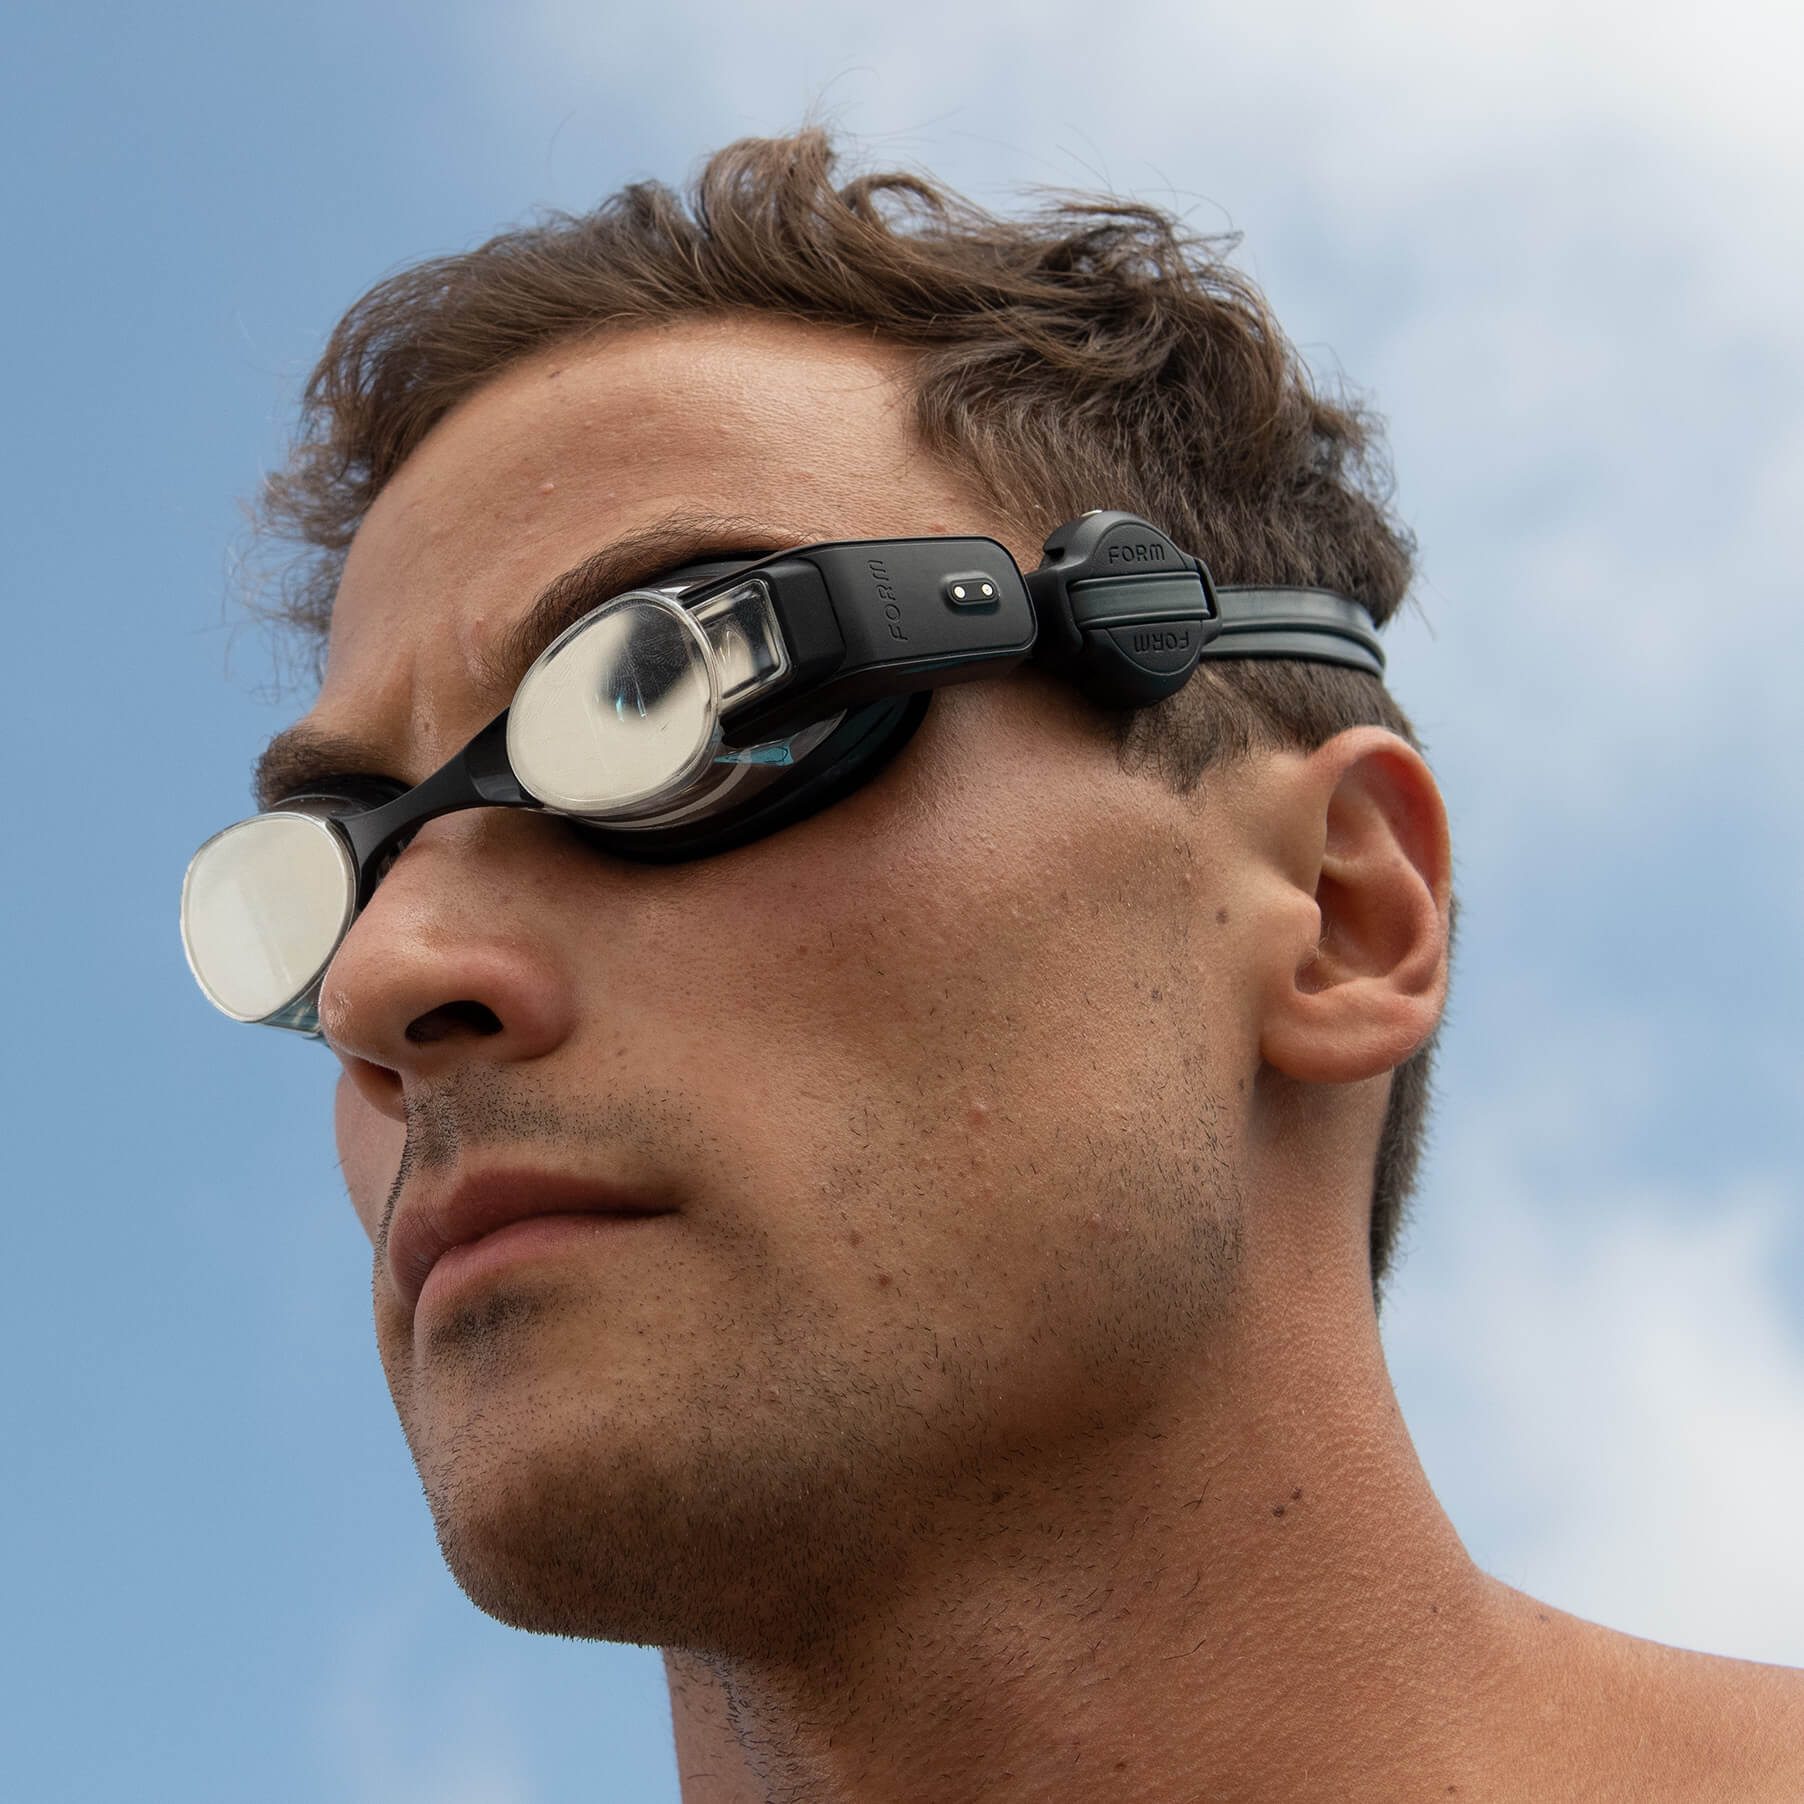 Man wearing swimming goggles with heart rate monitor attached